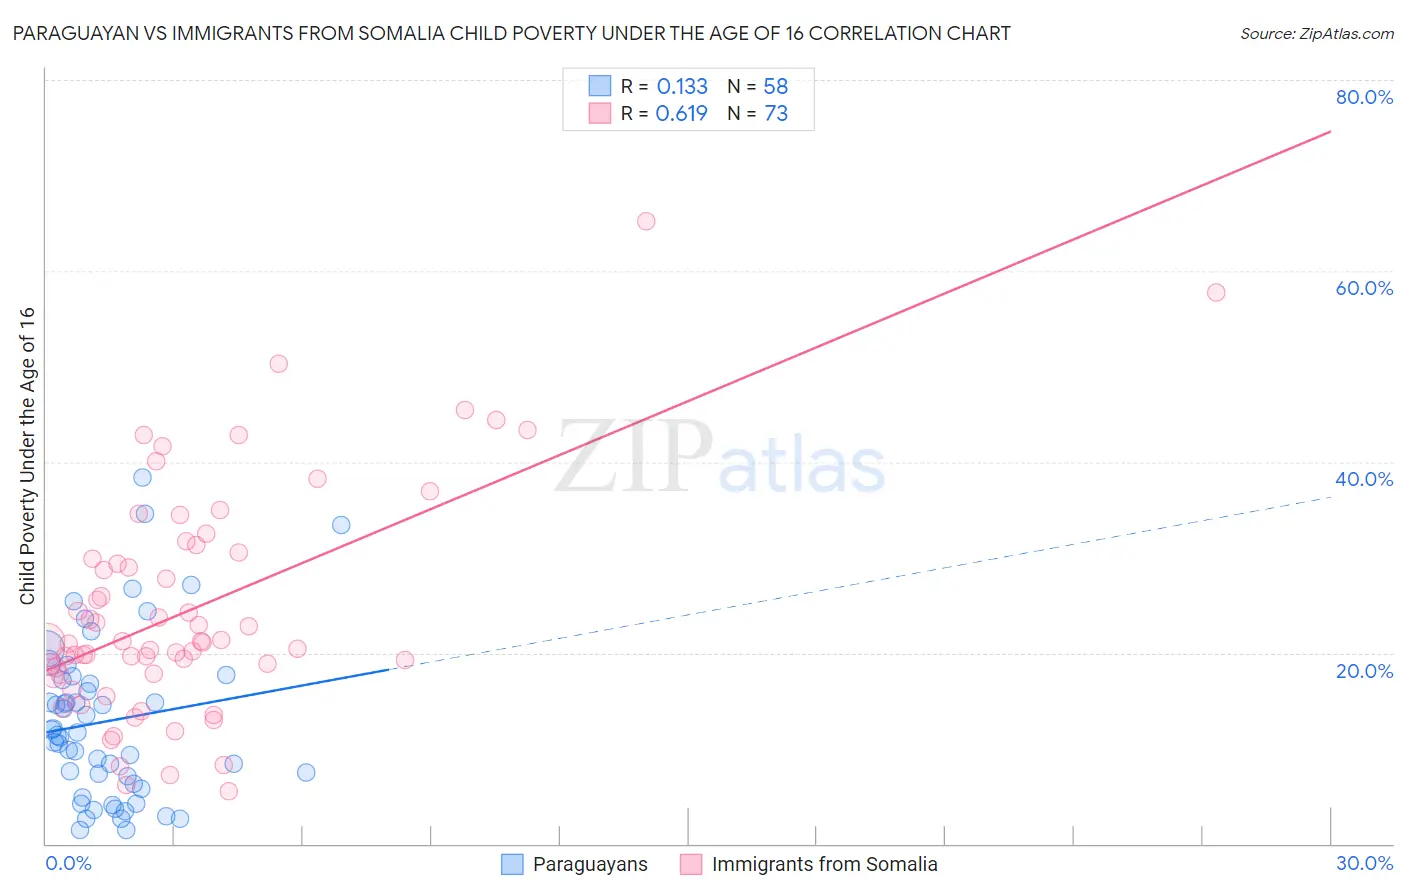 Paraguayan vs Immigrants from Somalia Child Poverty Under the Age of 16